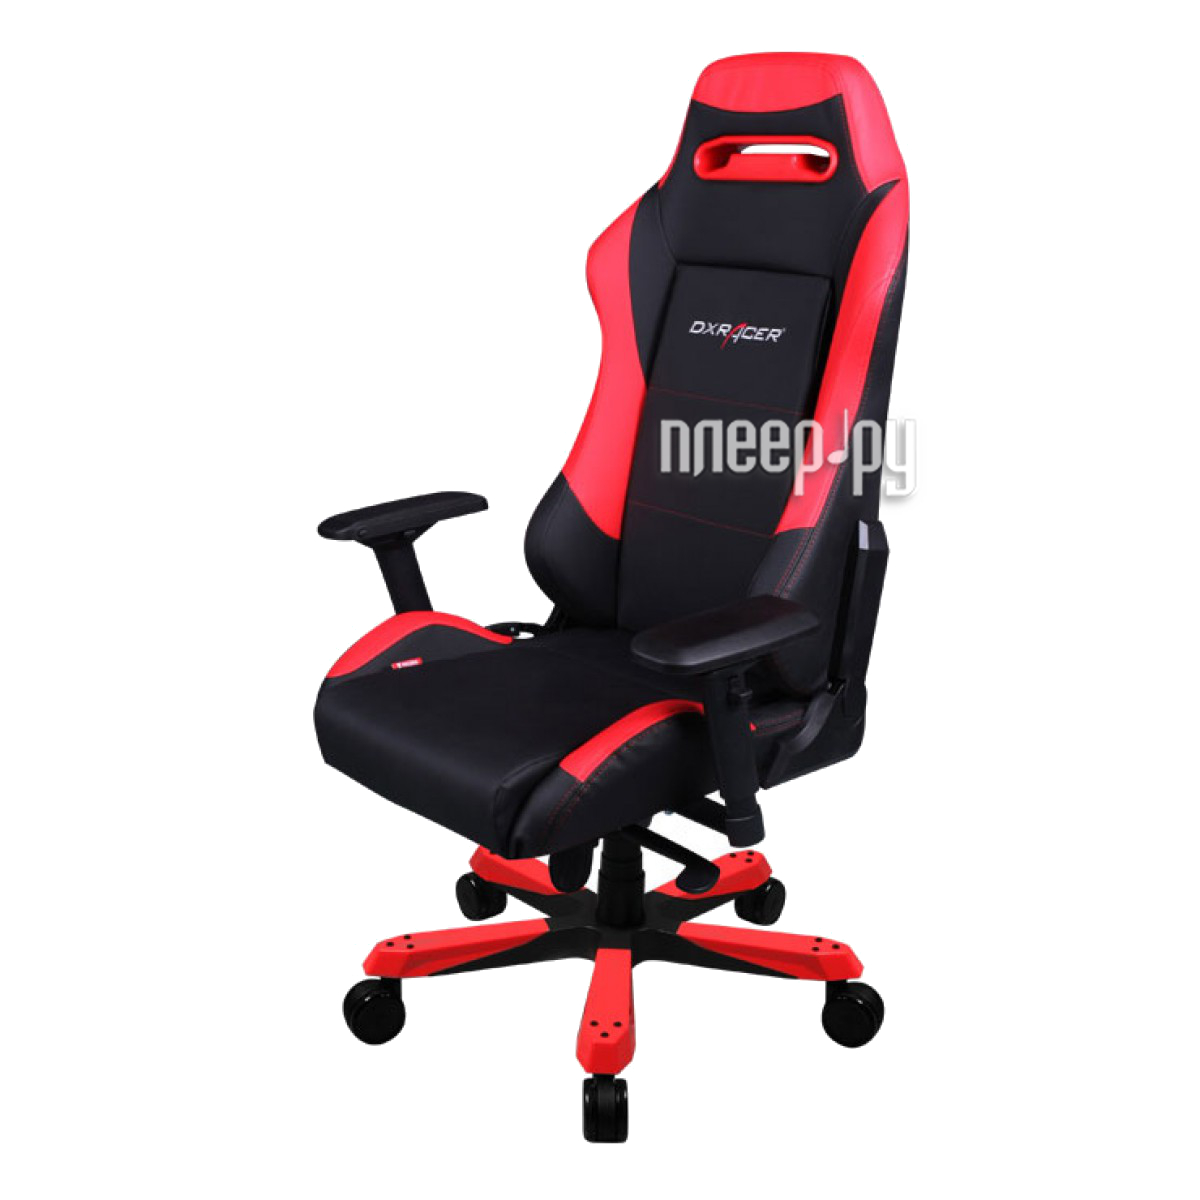   DXRacer OH / IS11 / NR  32962 